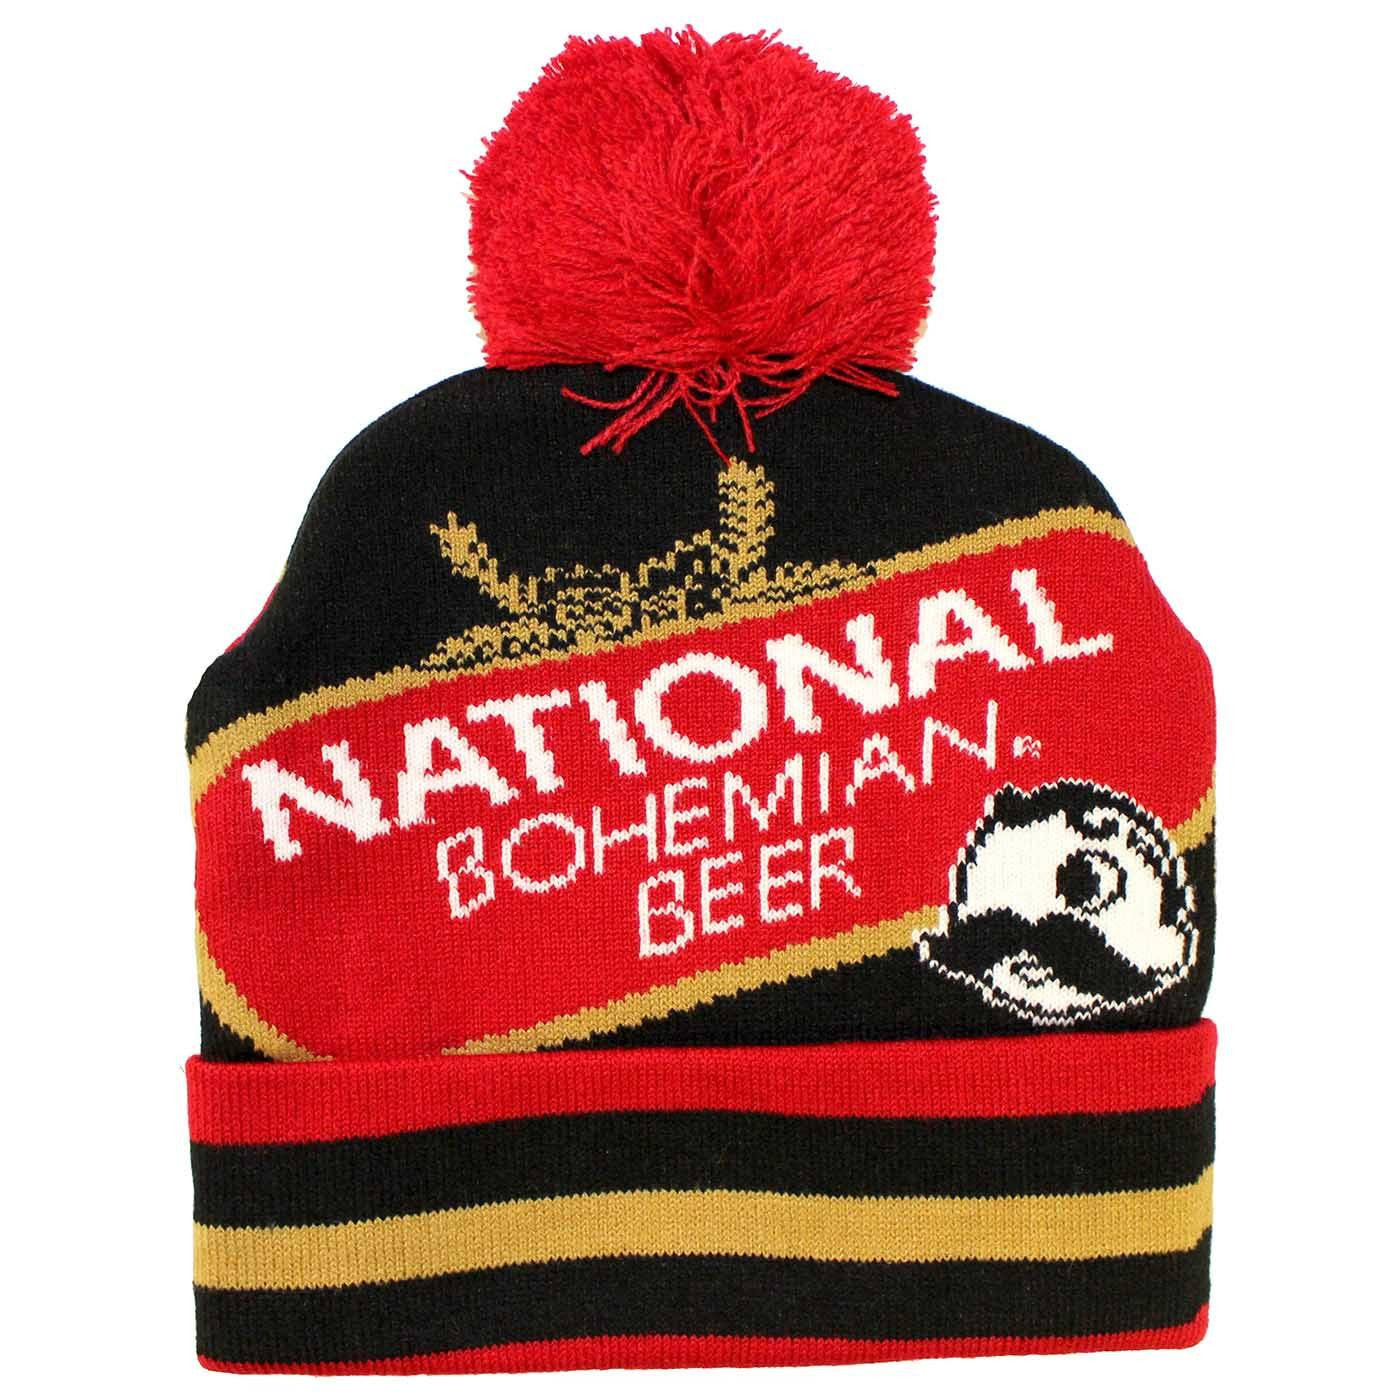 National Bohemian Beer w/ Red & Gold Stripes (Black w/ Red Pom) / Knit Beanie Cap - Route One Apparel